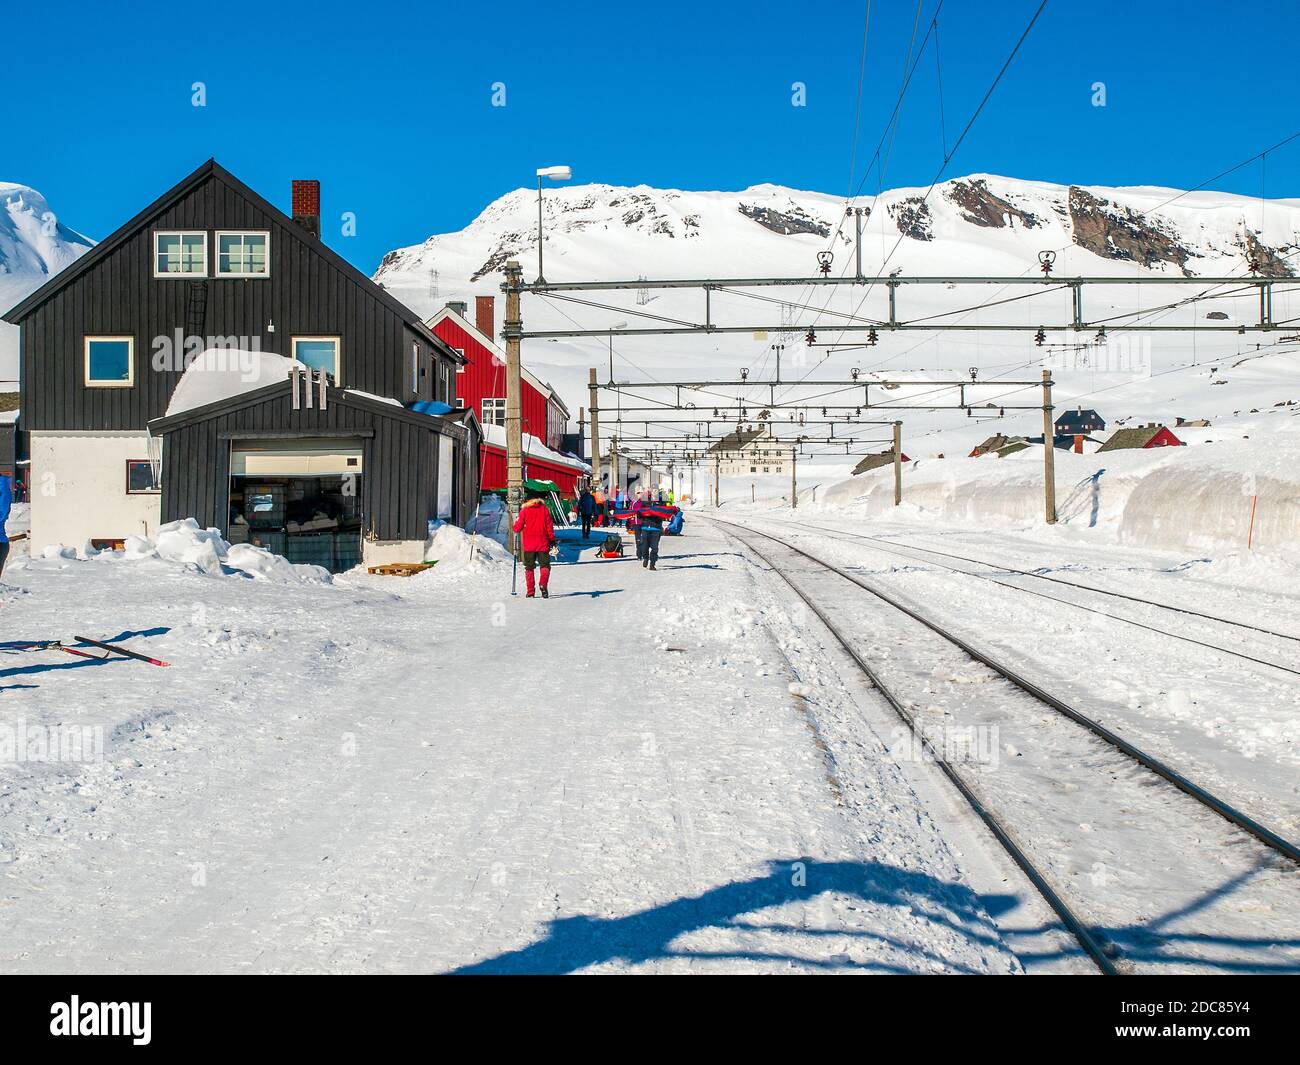 Finse in winter. Finse is a railway station and small village on the Oslo to Bergen railway line. Norway Stock Photo